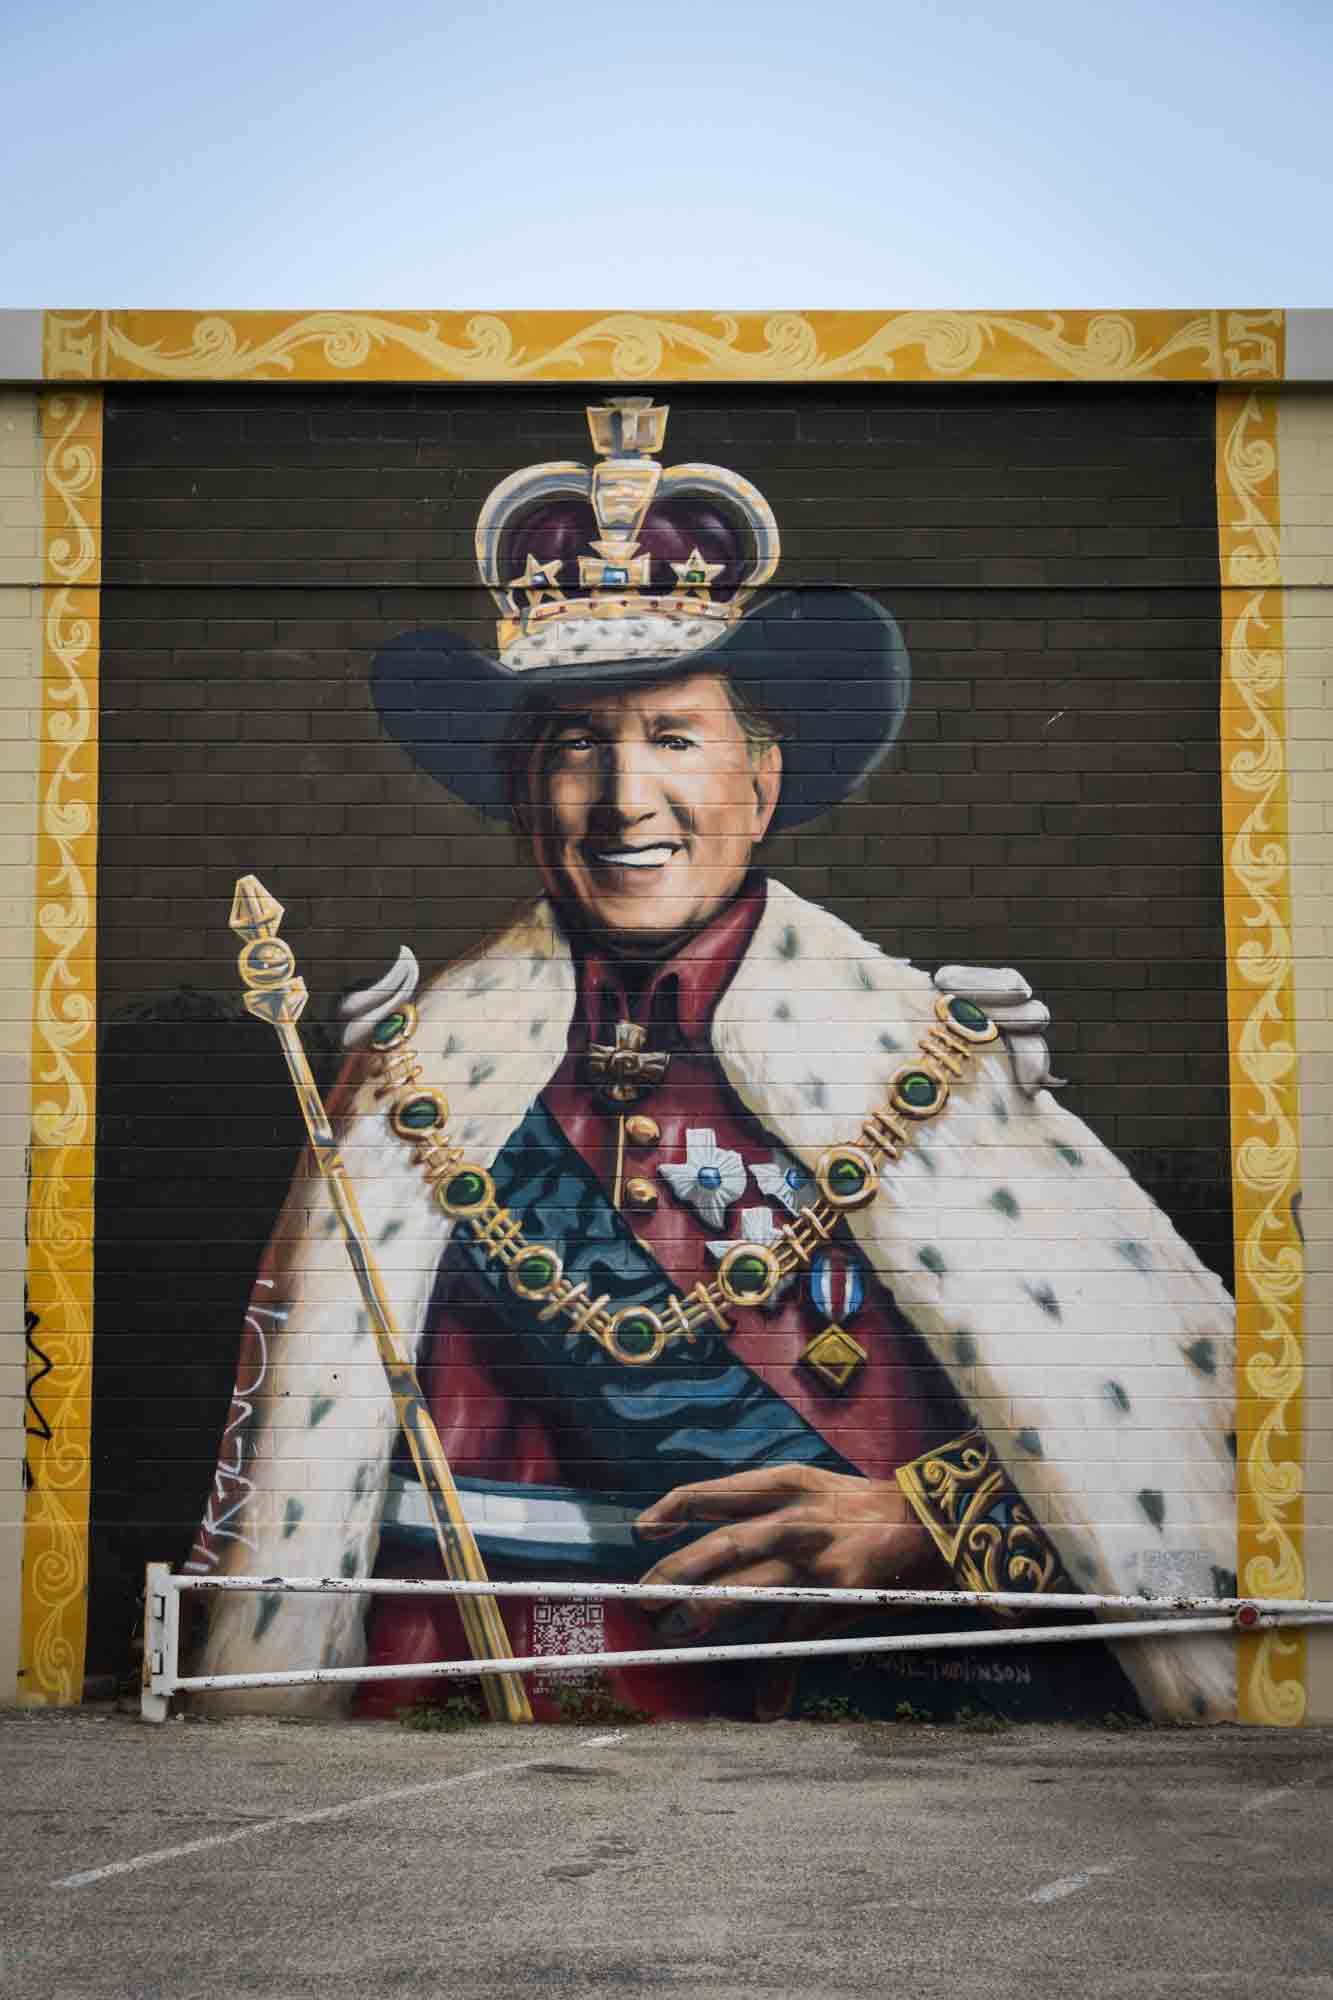 Mural of man dressed as king with cowboy hat on wall in San Antonio